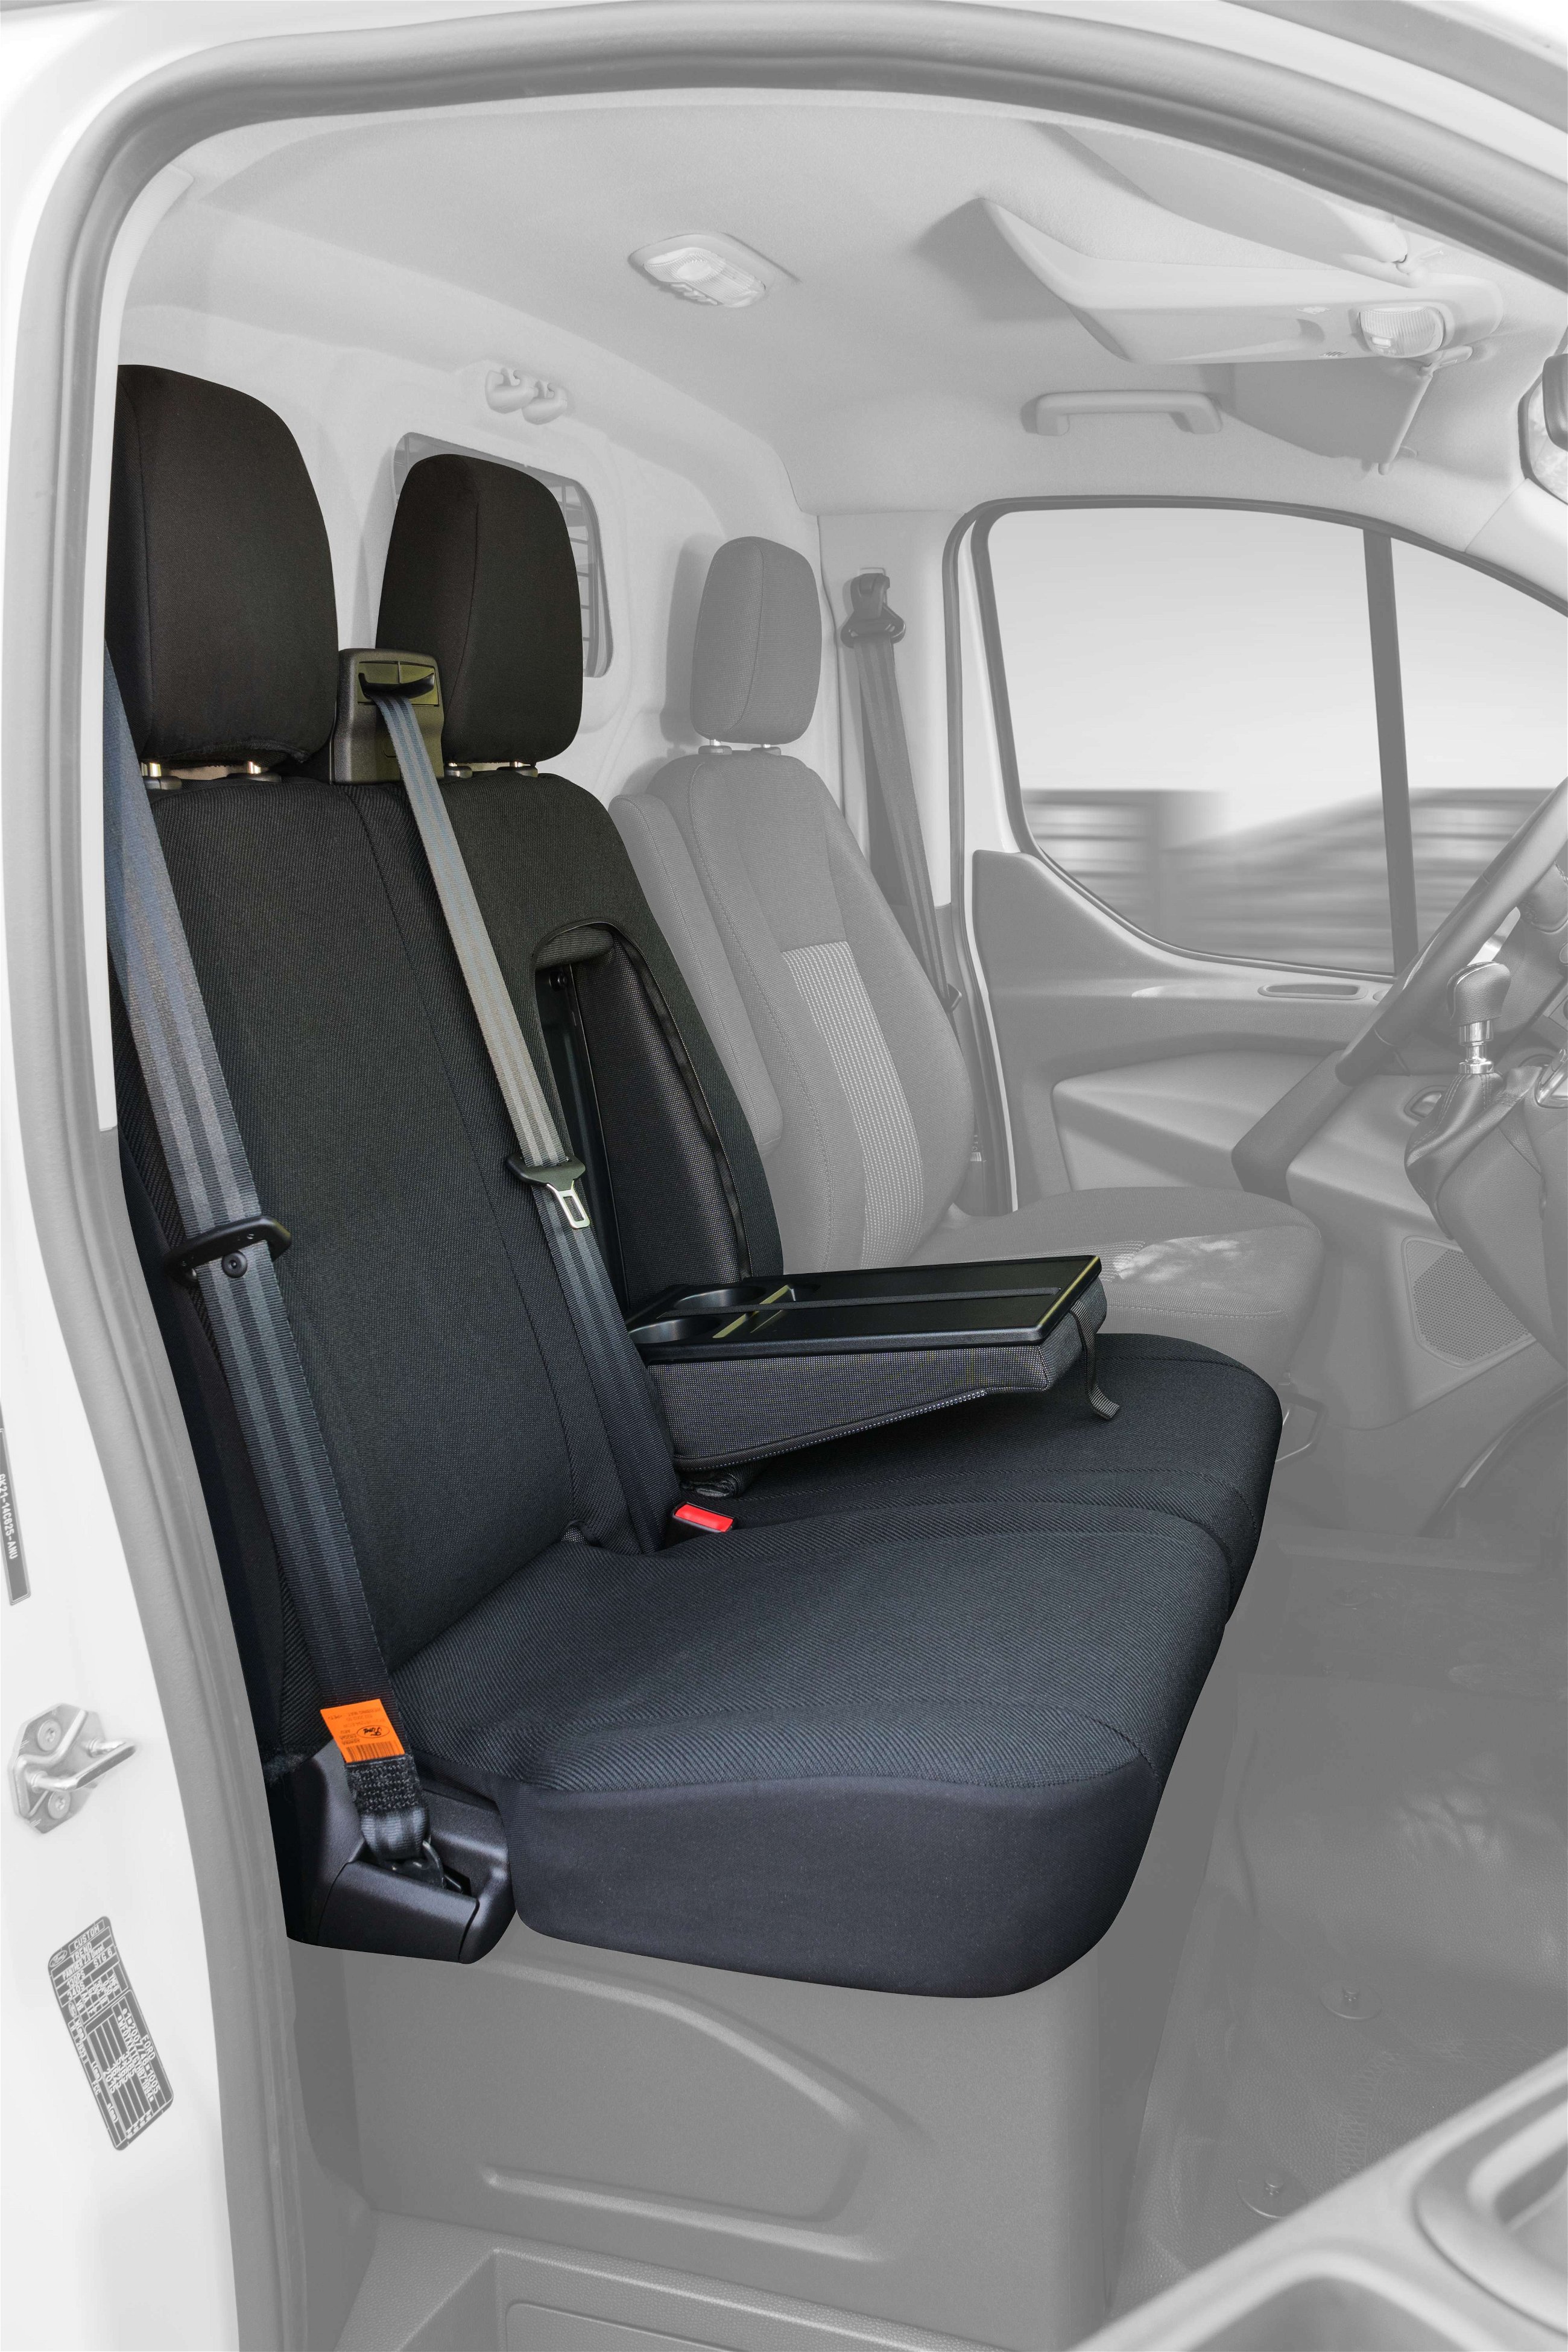 Walser 10532 Charcoal Ford Transit Fitted SEAT Covers for Double Bench Front Fabric from 05/ 